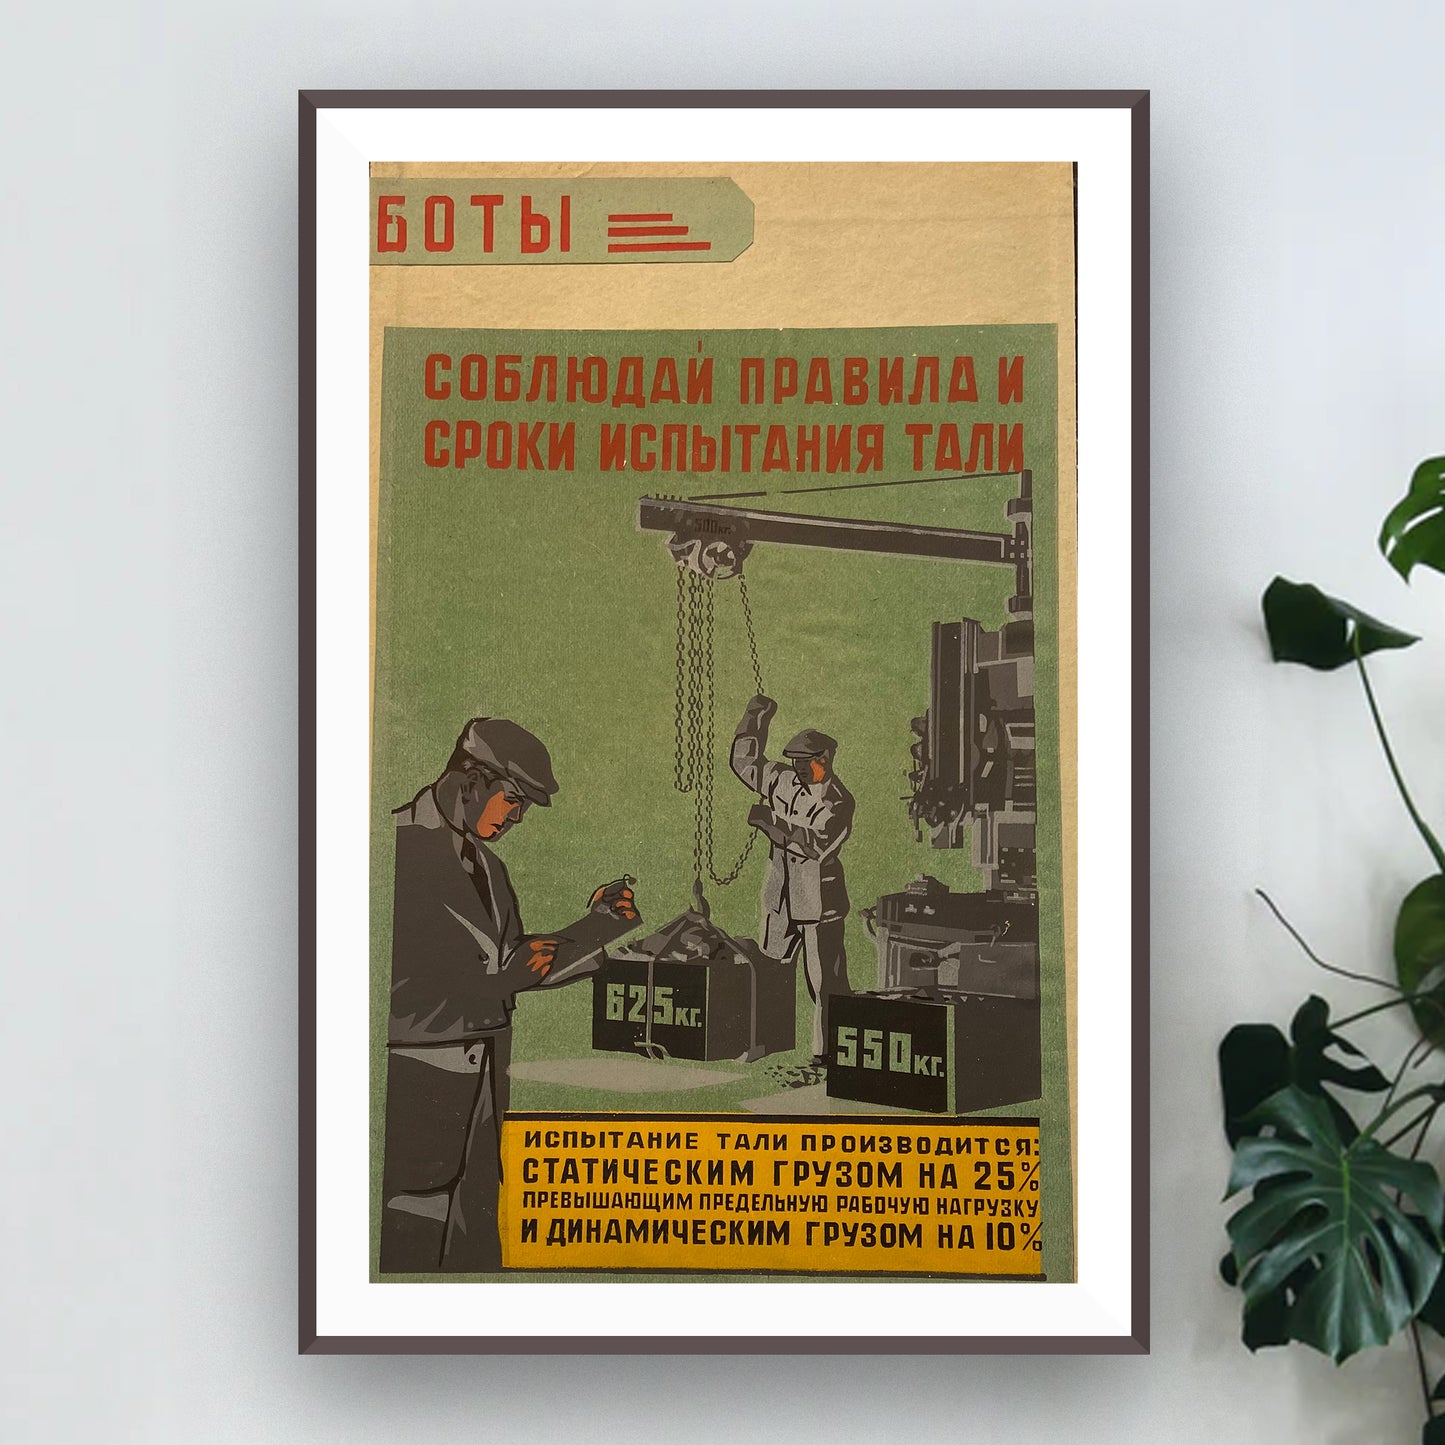 Poster, "Observe the rules and deadlines for testing the hoist", Worker safety VEF Riga, Latvian SSR, 1960s